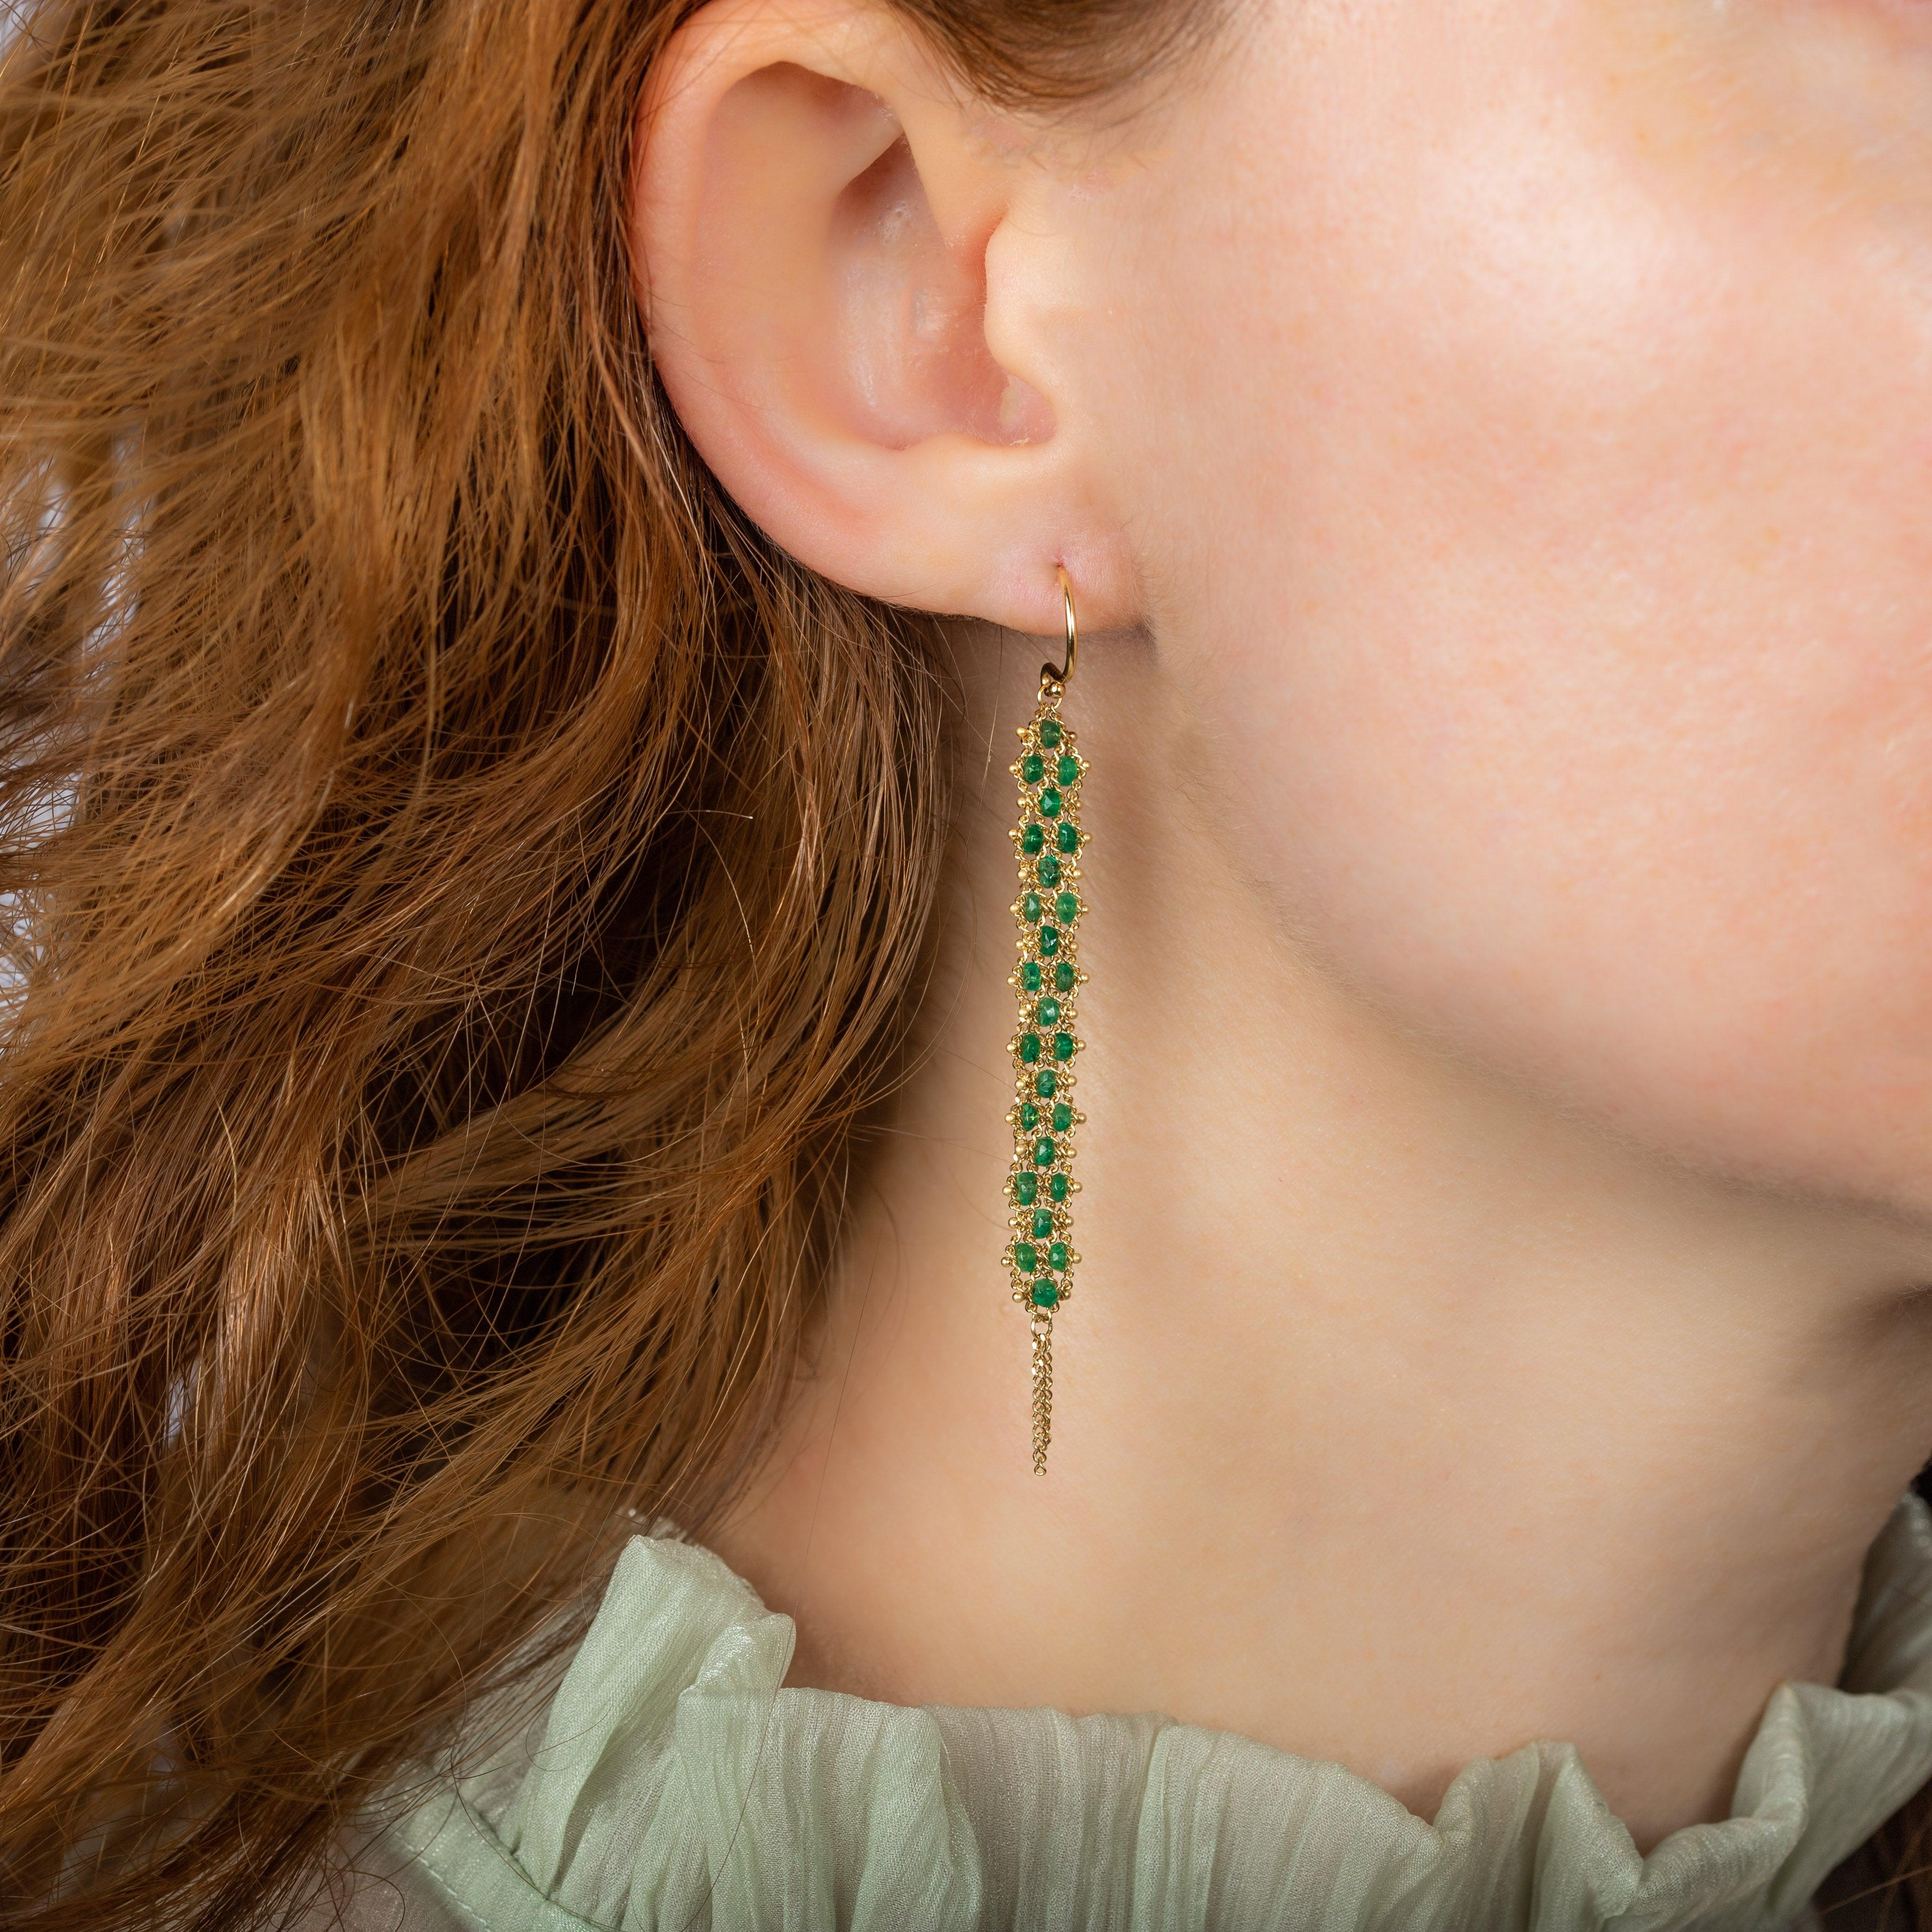 These earrings shimmer with a verdant swath of lush green Emeralds that have been meticulously hand-woven into 18K yellow gold chains to achieve a textile-like effect. The result is long and flexible, with a short burst of gold chain cascading off